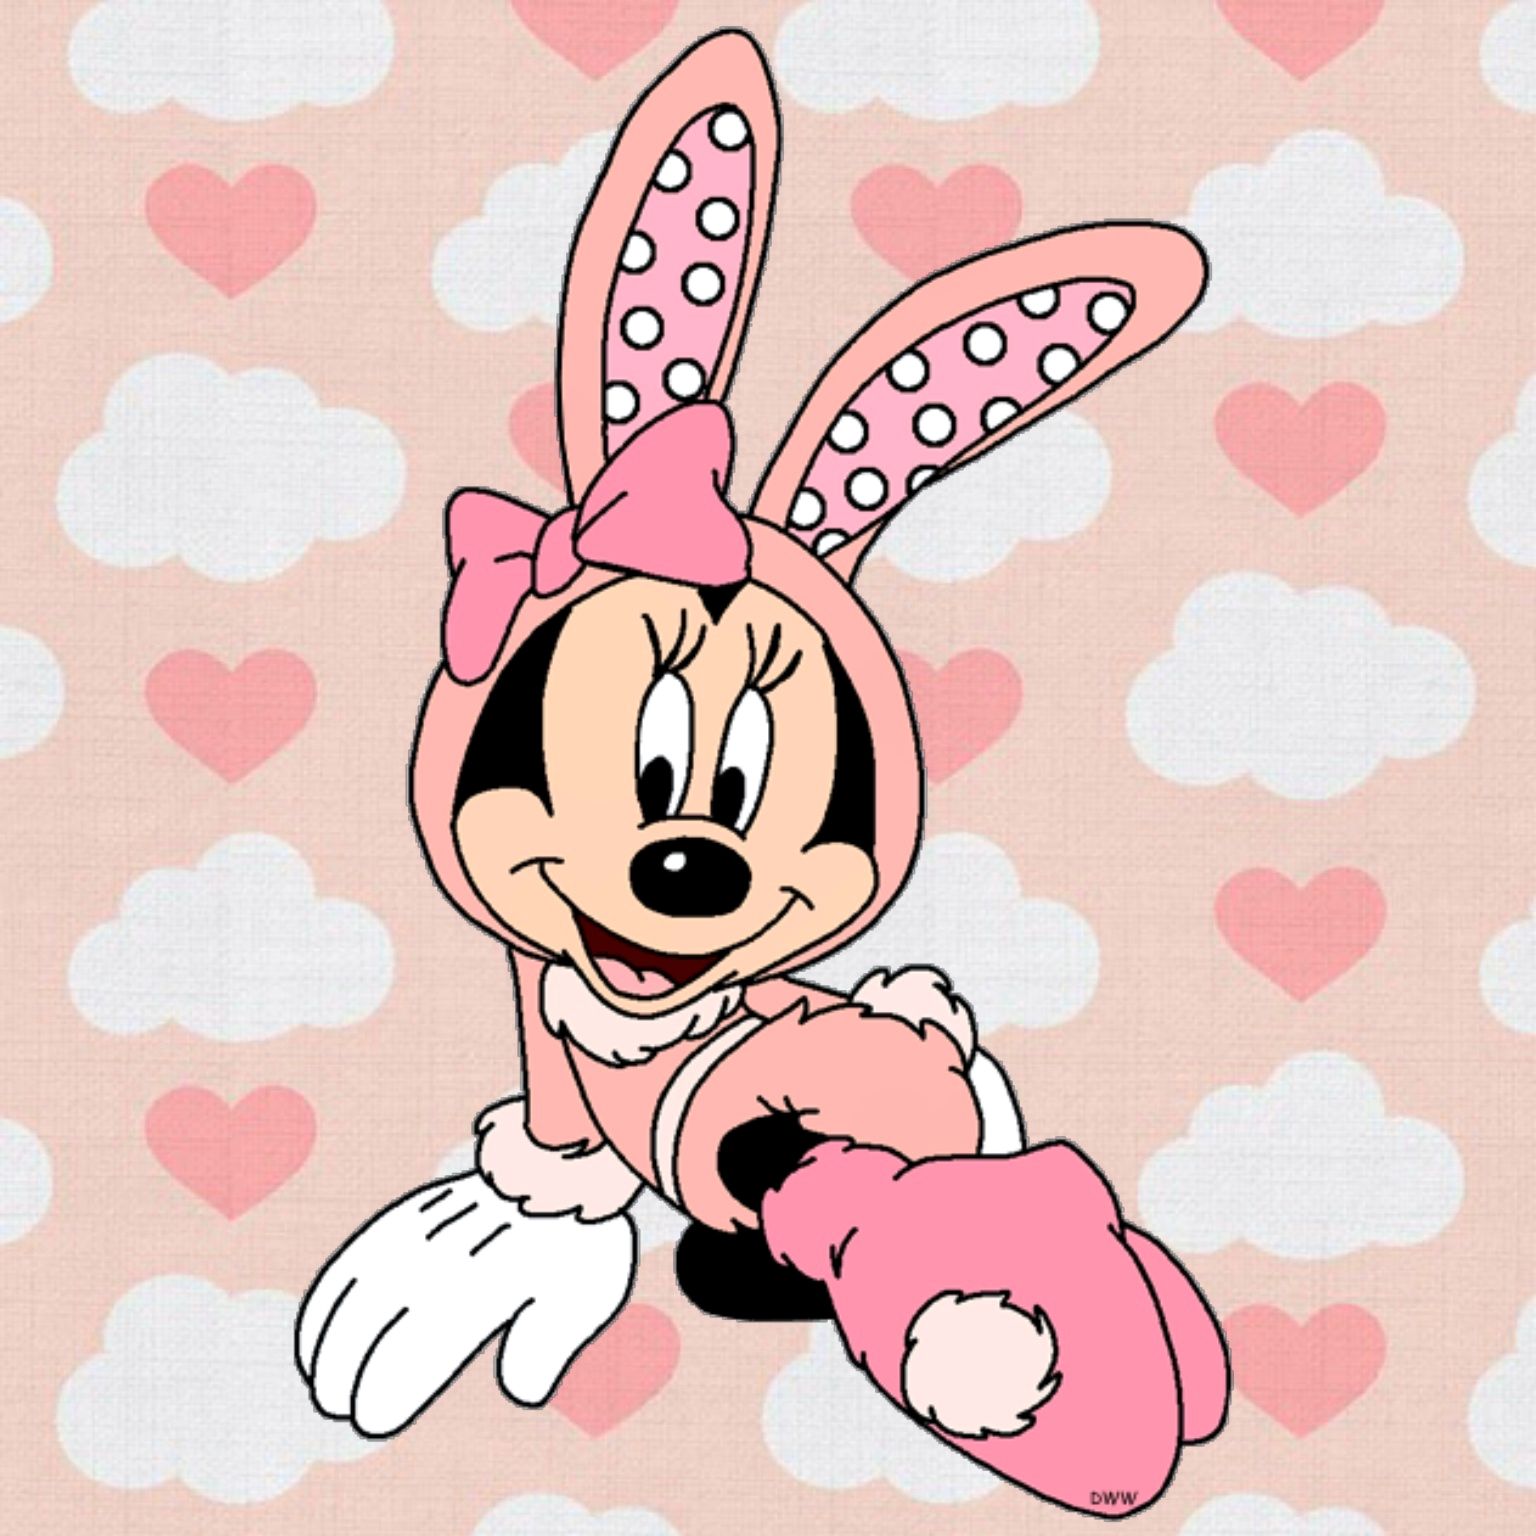 Minnie dressed as an Easter Bunny. Mickey mouse art